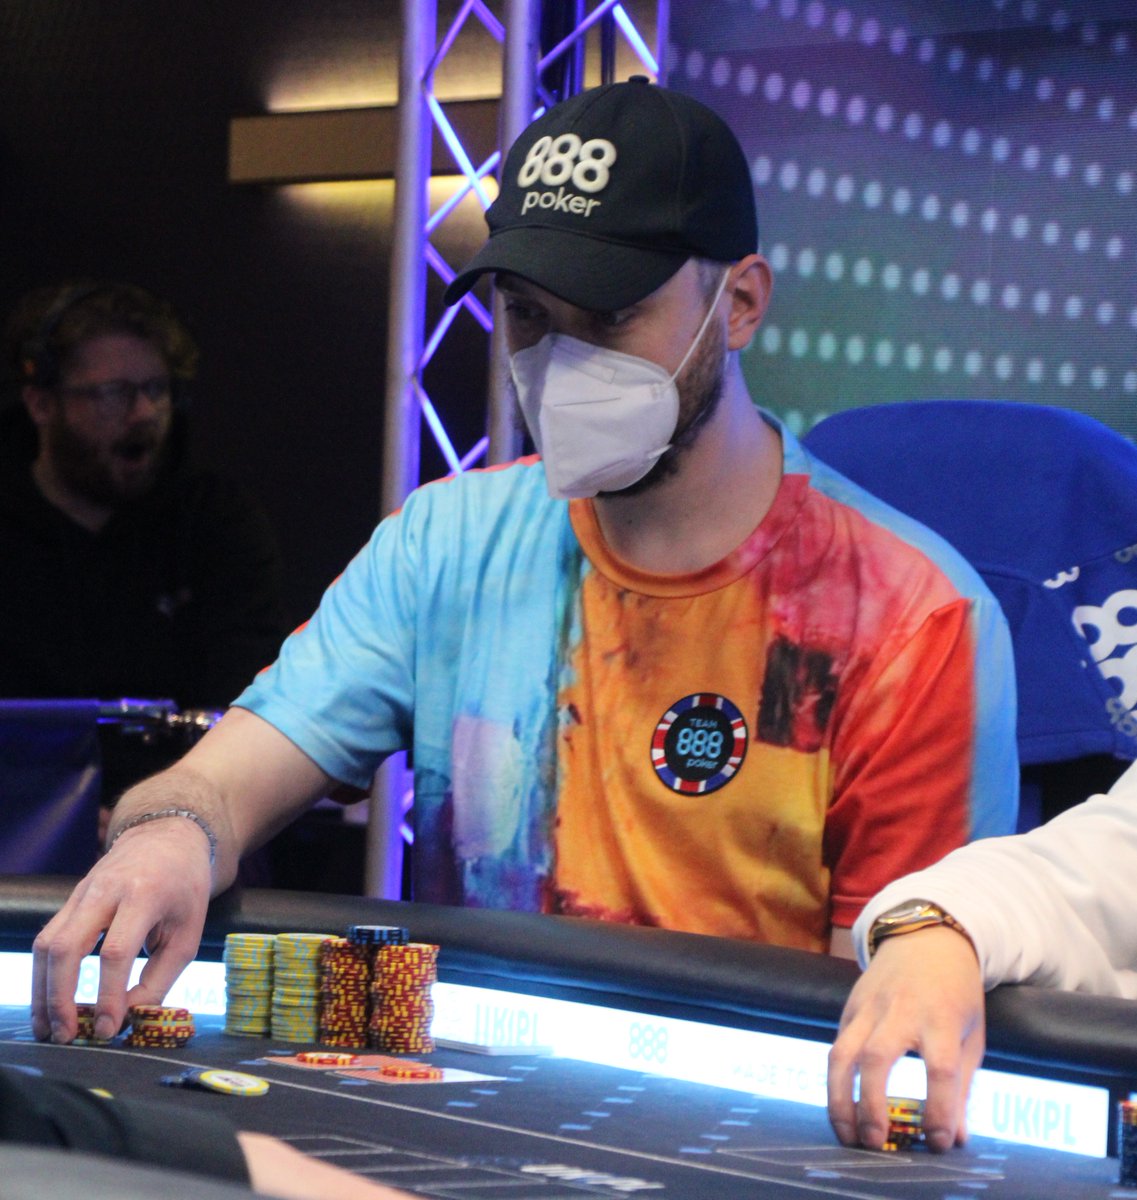 Well played to 888poker Pro Ian Simpson who has just finished second in the UKPL Manchester High Roller Event. In his final hand, Ian calls off his 16 bigs with Q-10 suited and can't beat the A-6 of Andrew Hulme. Ian cashes for £15,760 for 2nd.